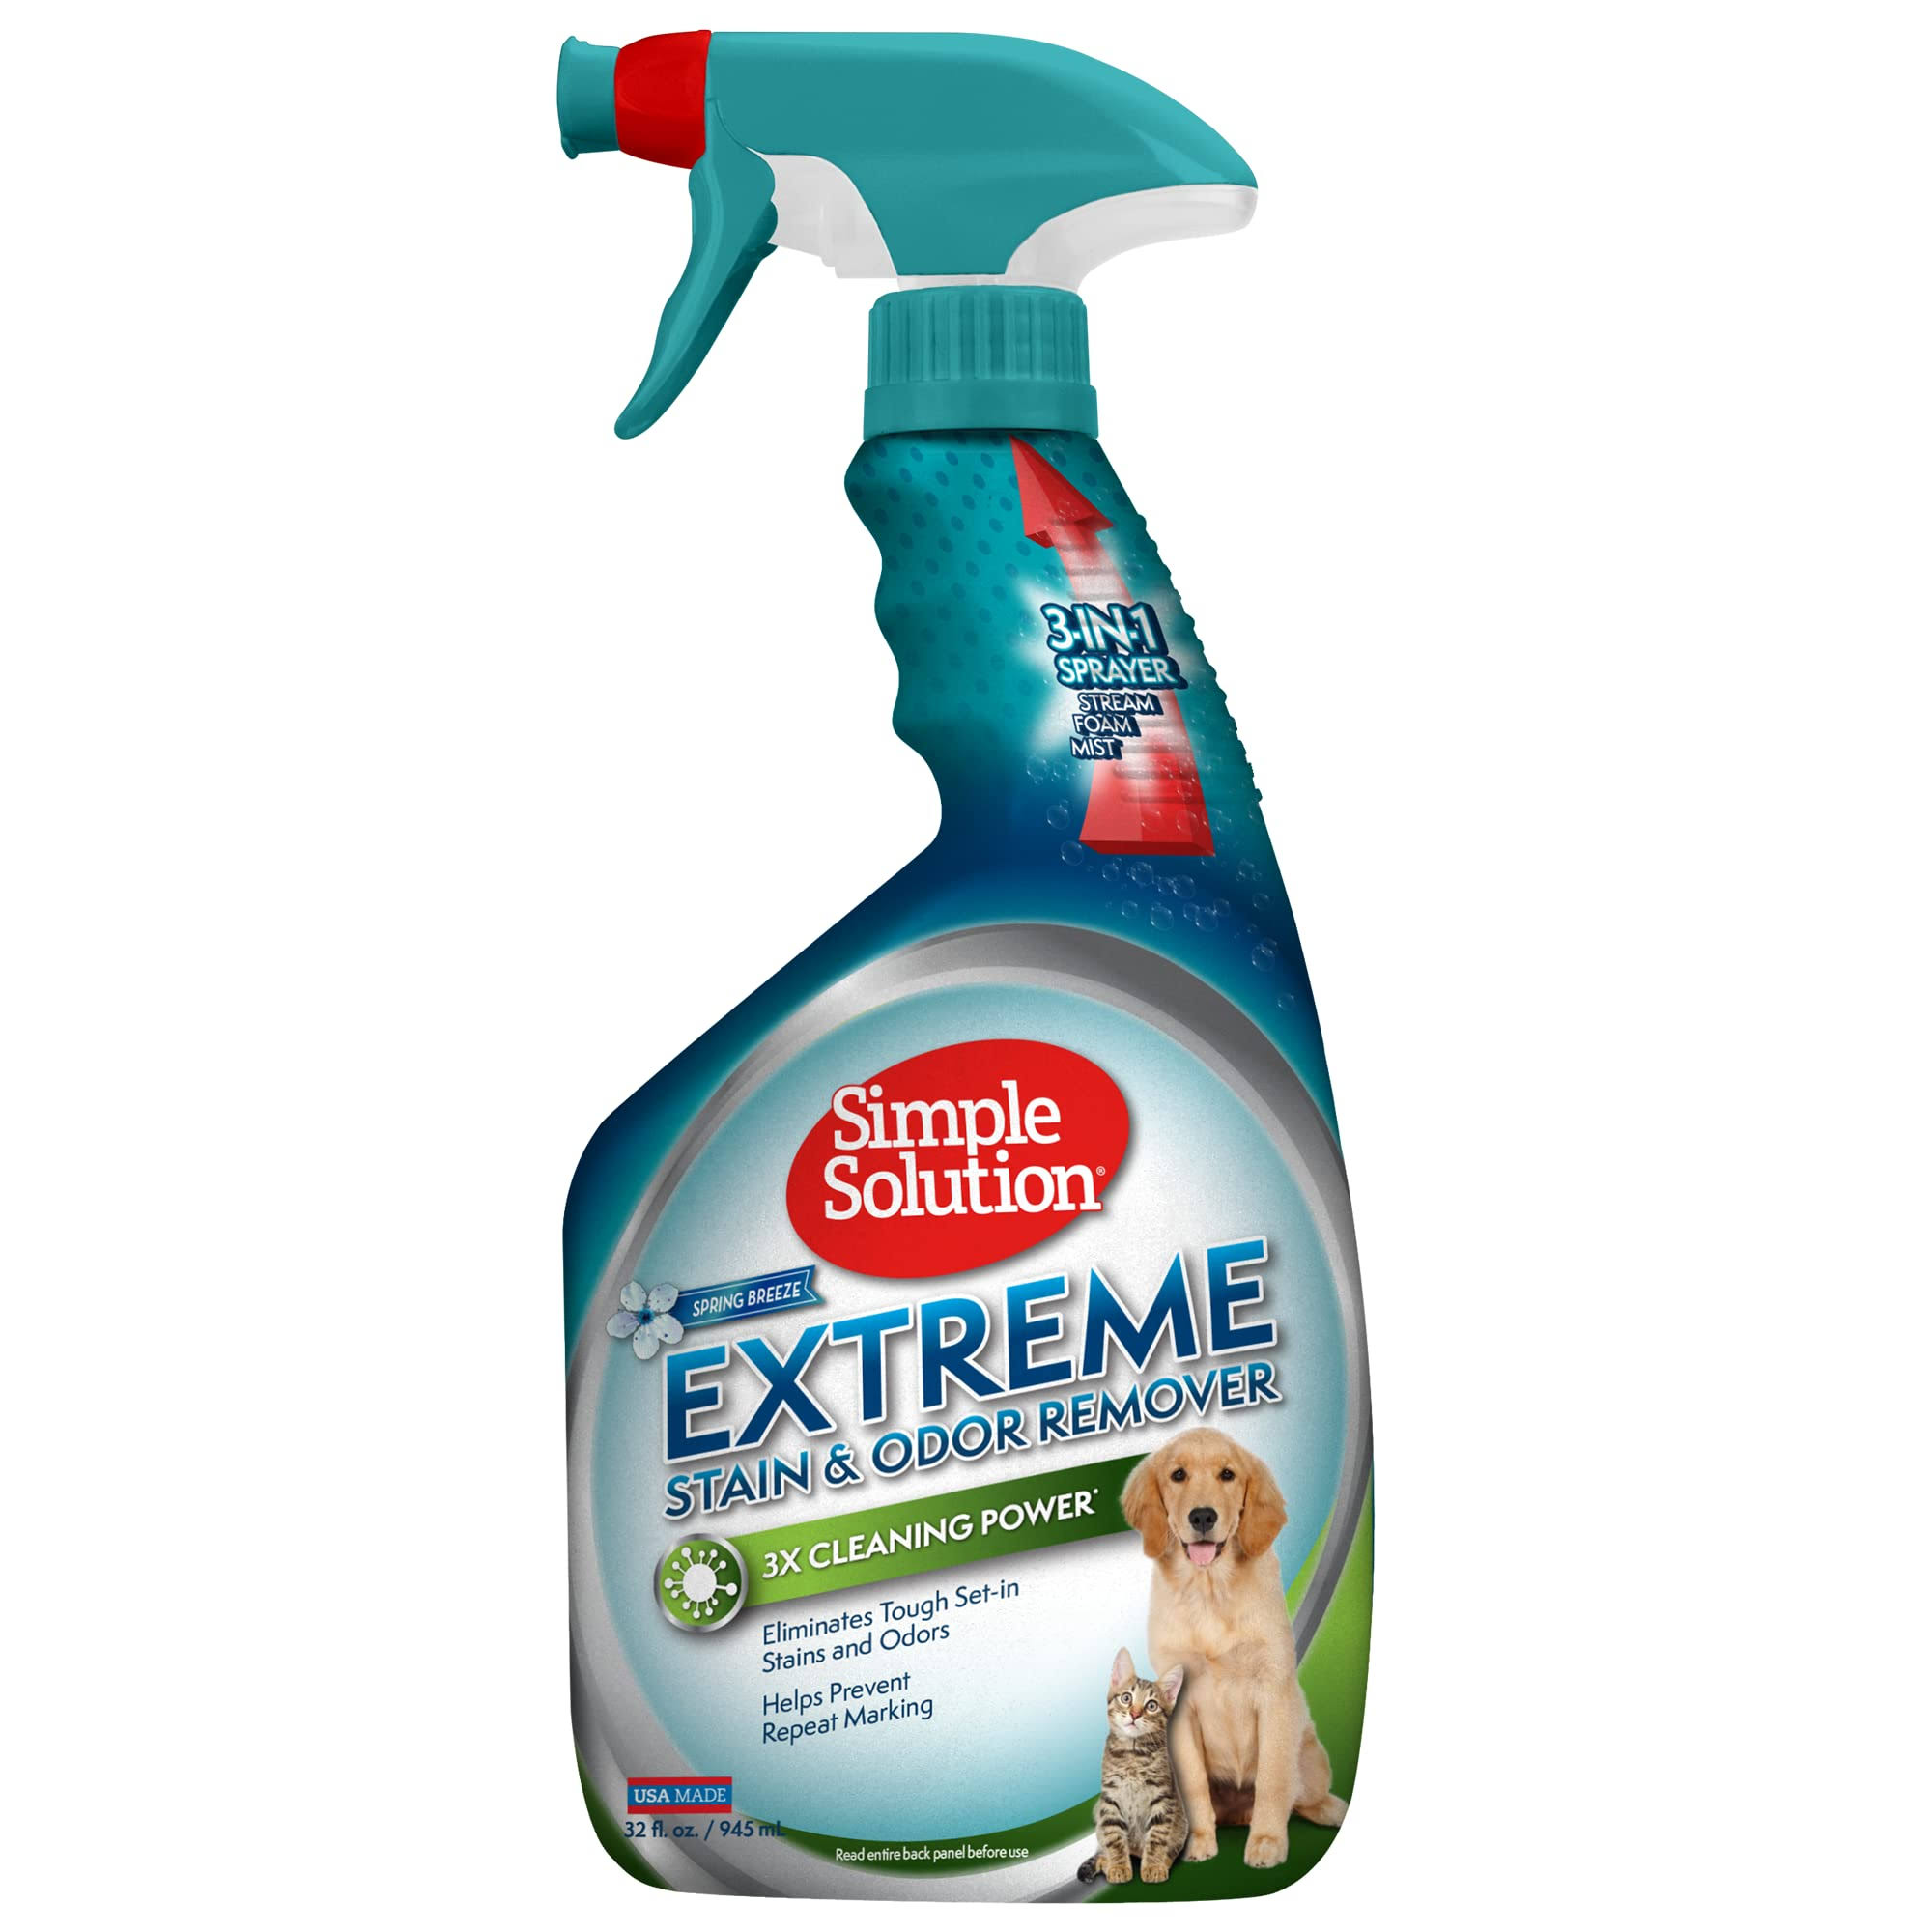 Simple Solution Extreme Spring Breeze Stain and Odor Remover Spray - 32oz